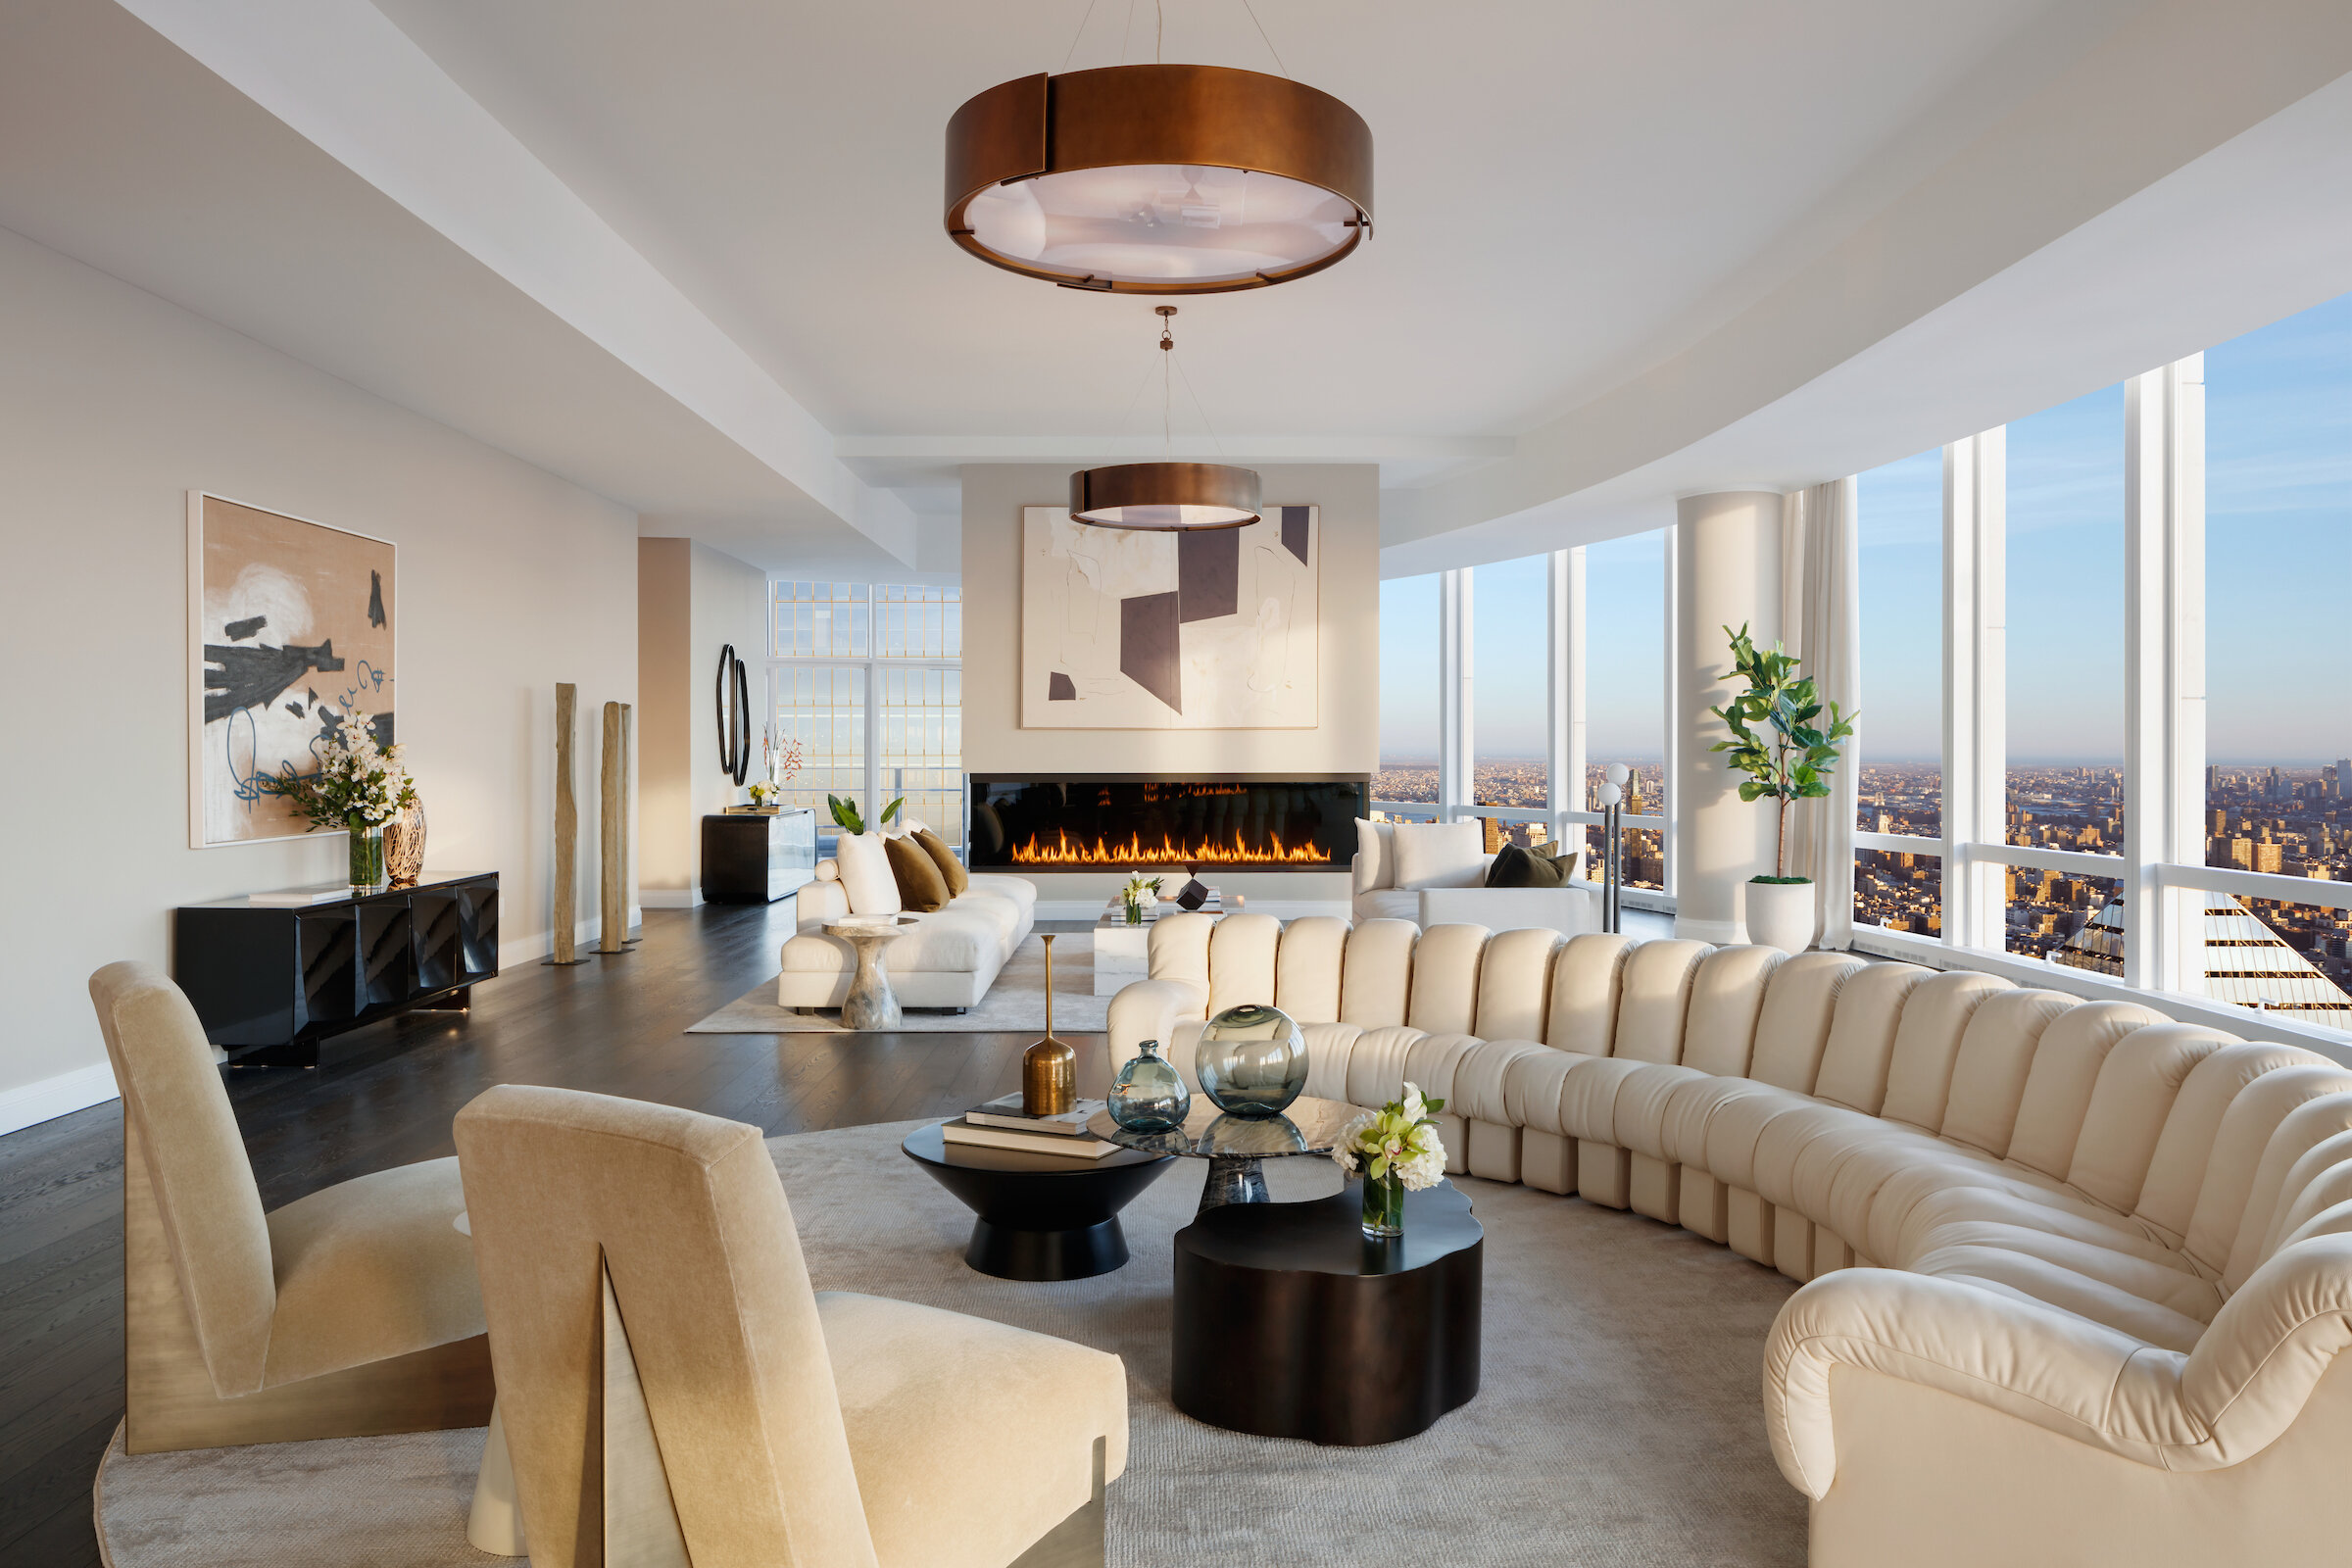  Residents will also be able to take advantage of the unique lifestyle that Hudson Yards will offer – incorporating the finest shopping, dining, arts, culture, fitness and innovation with the highest standards of residential design, services and cons